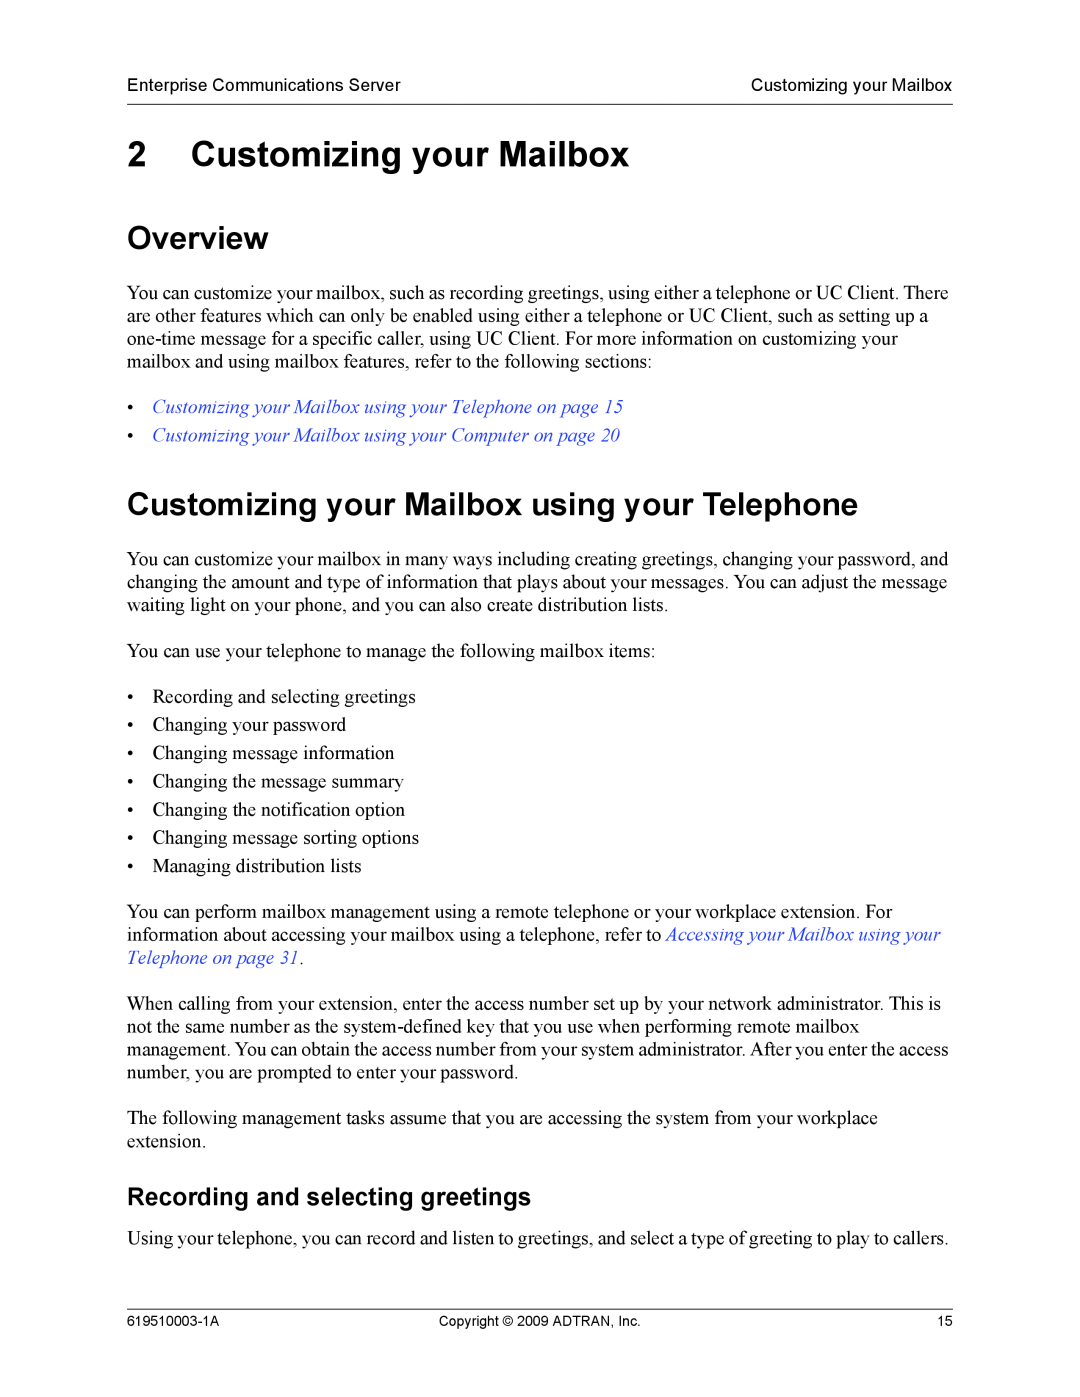 ADTRAN 619510003-1A manual Customizing your Mailbox using your Telephone, Recording and selecting greetings, Overview 